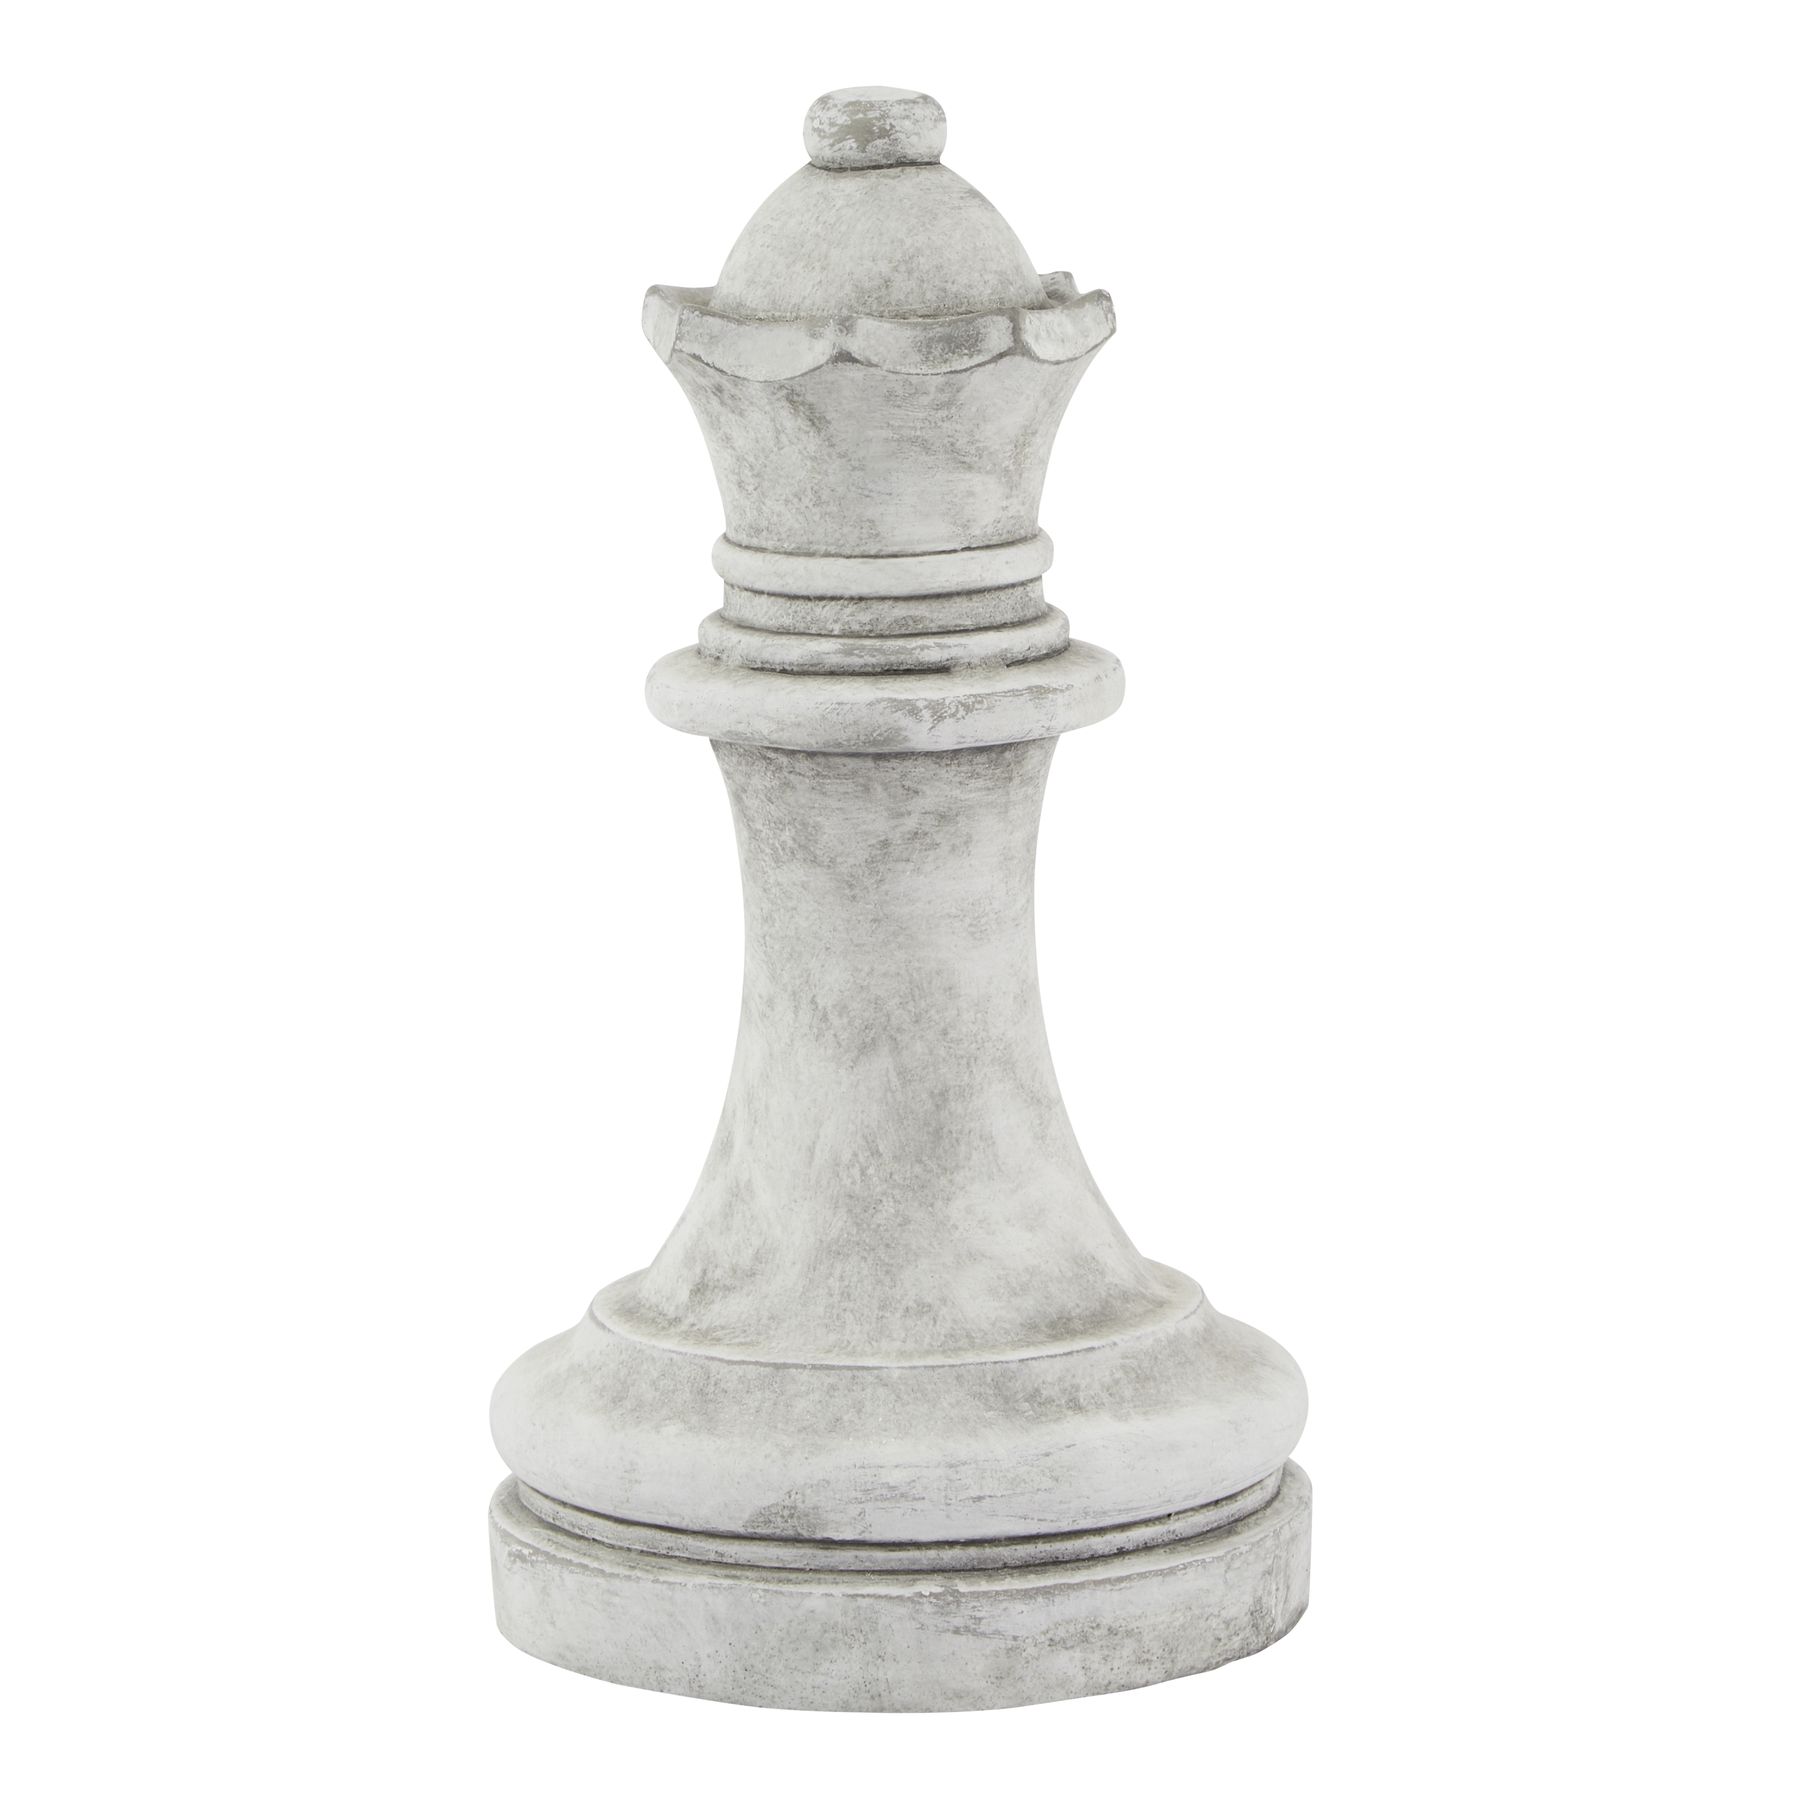 Athena Stone Queen Chess Piece - Image 1